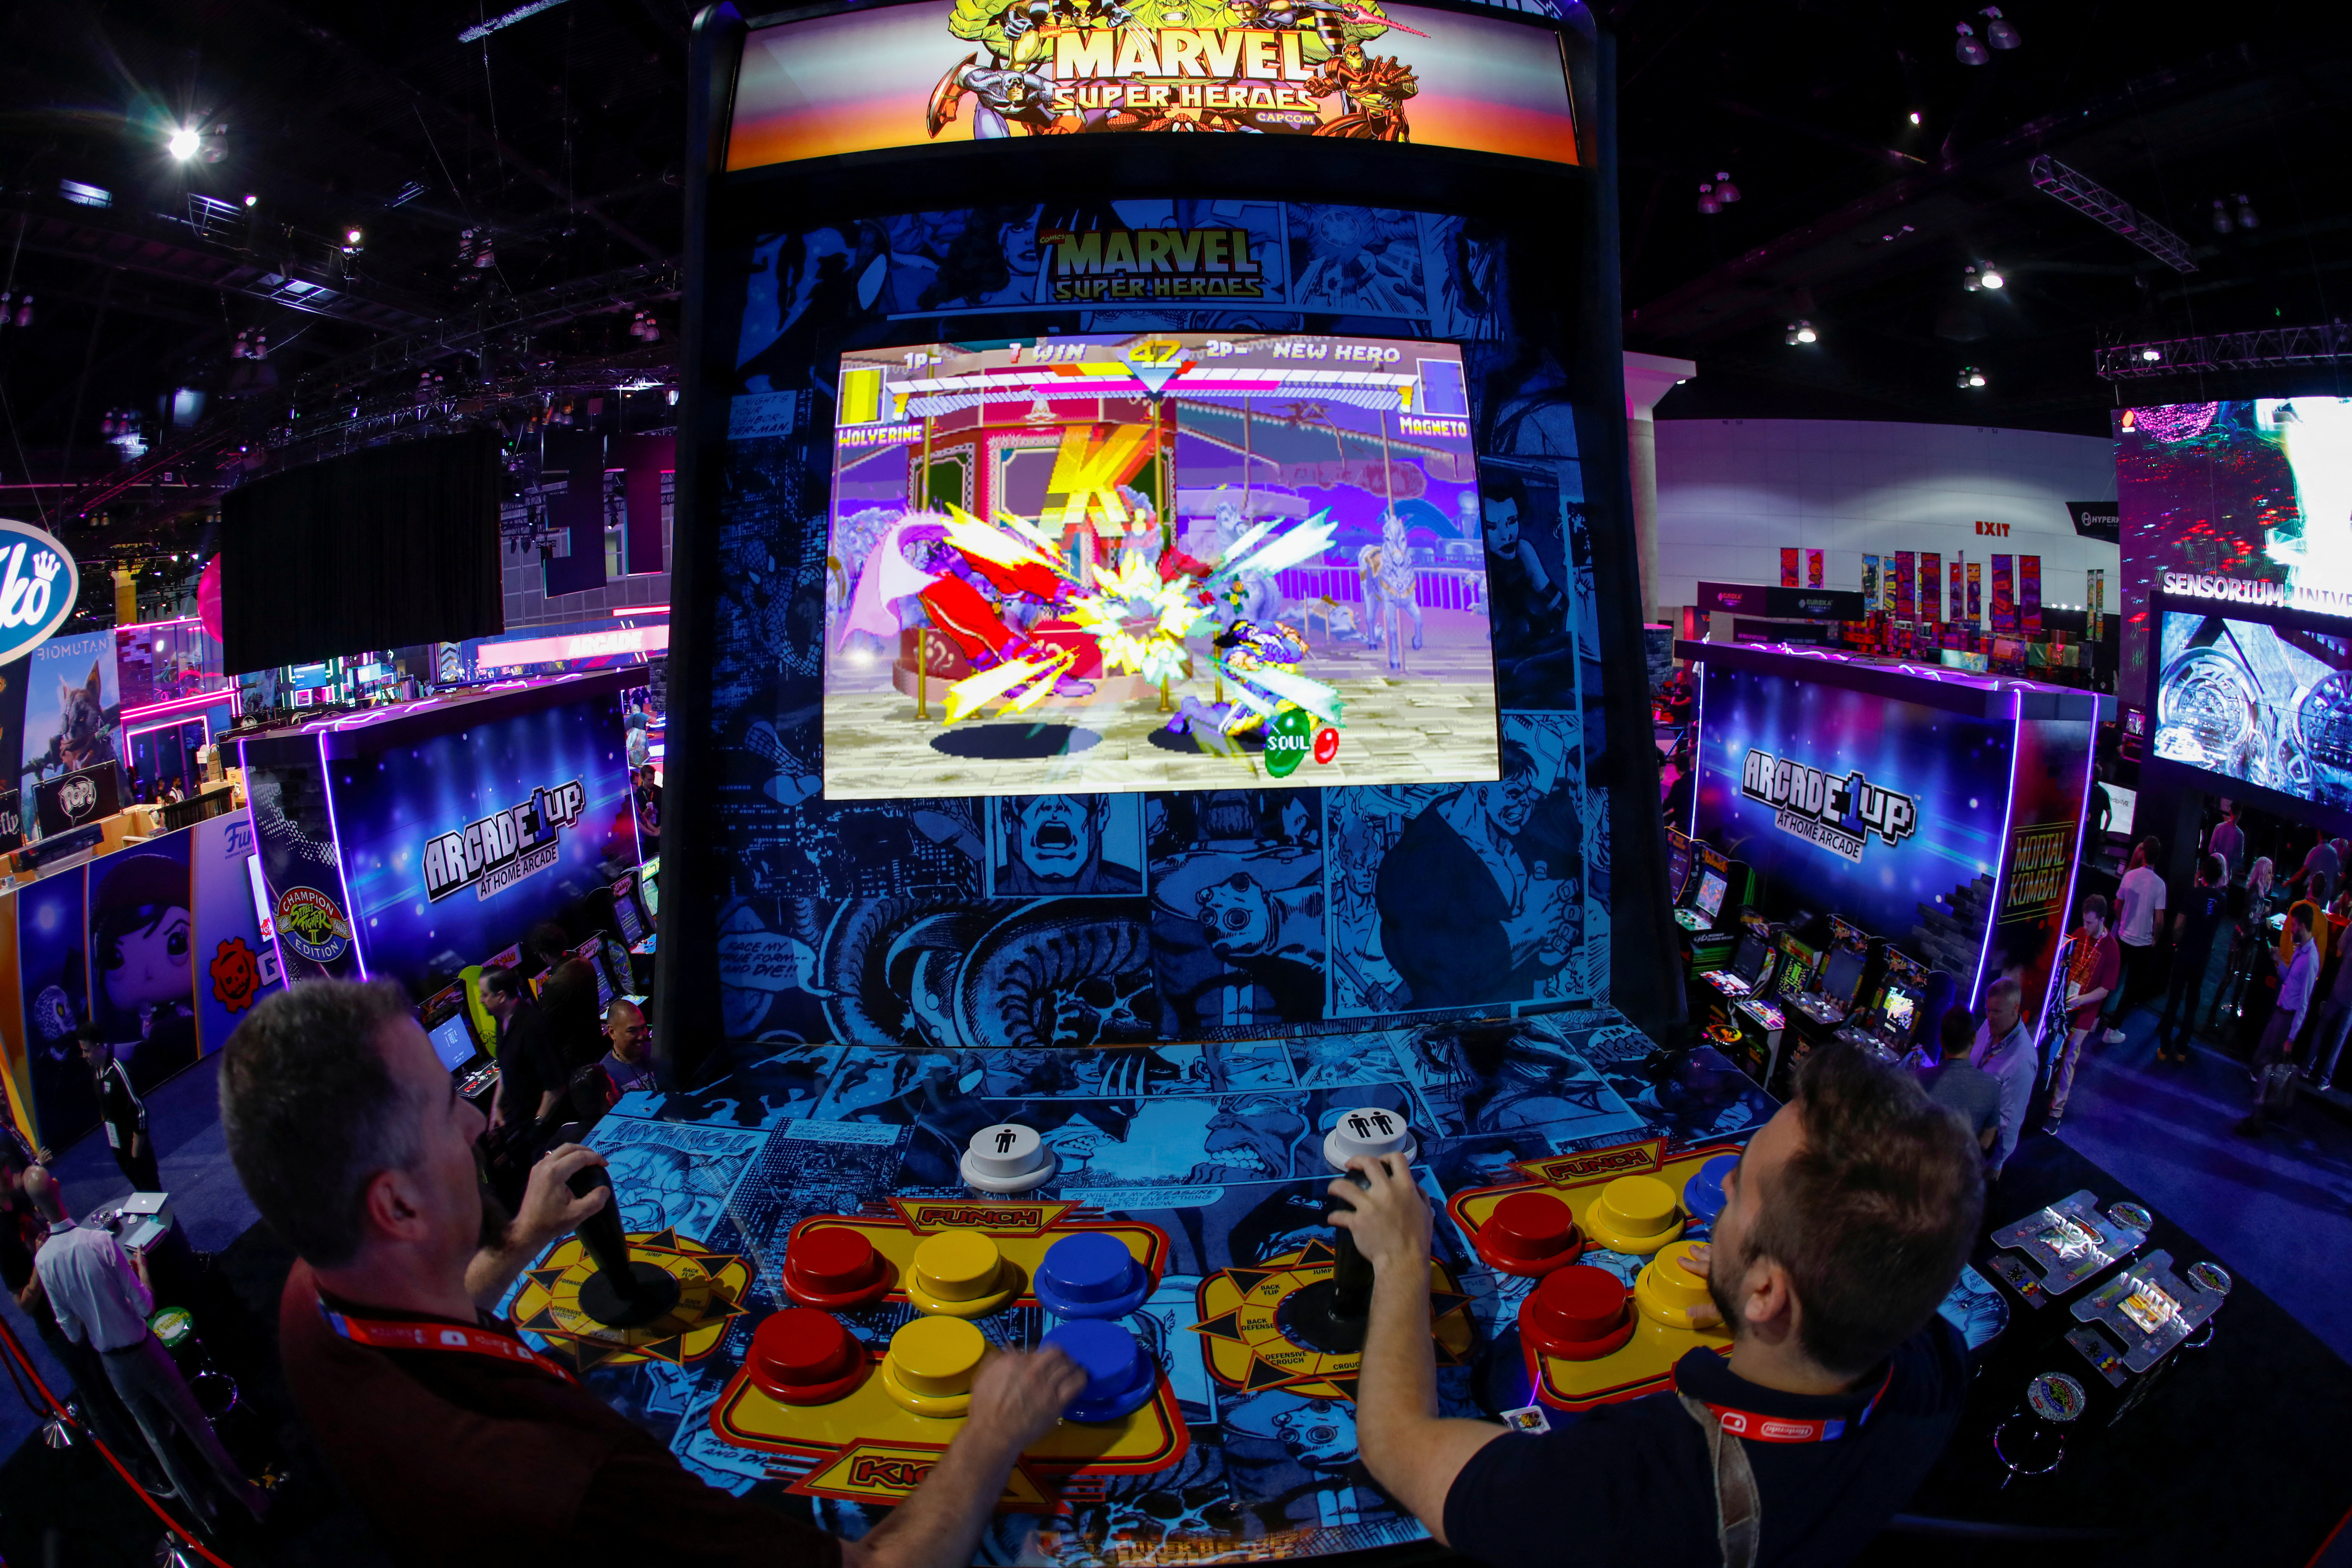 Attendees play a video game at E3, the annual video games expo experience the latest in gaming software and hardware in Los Angeles